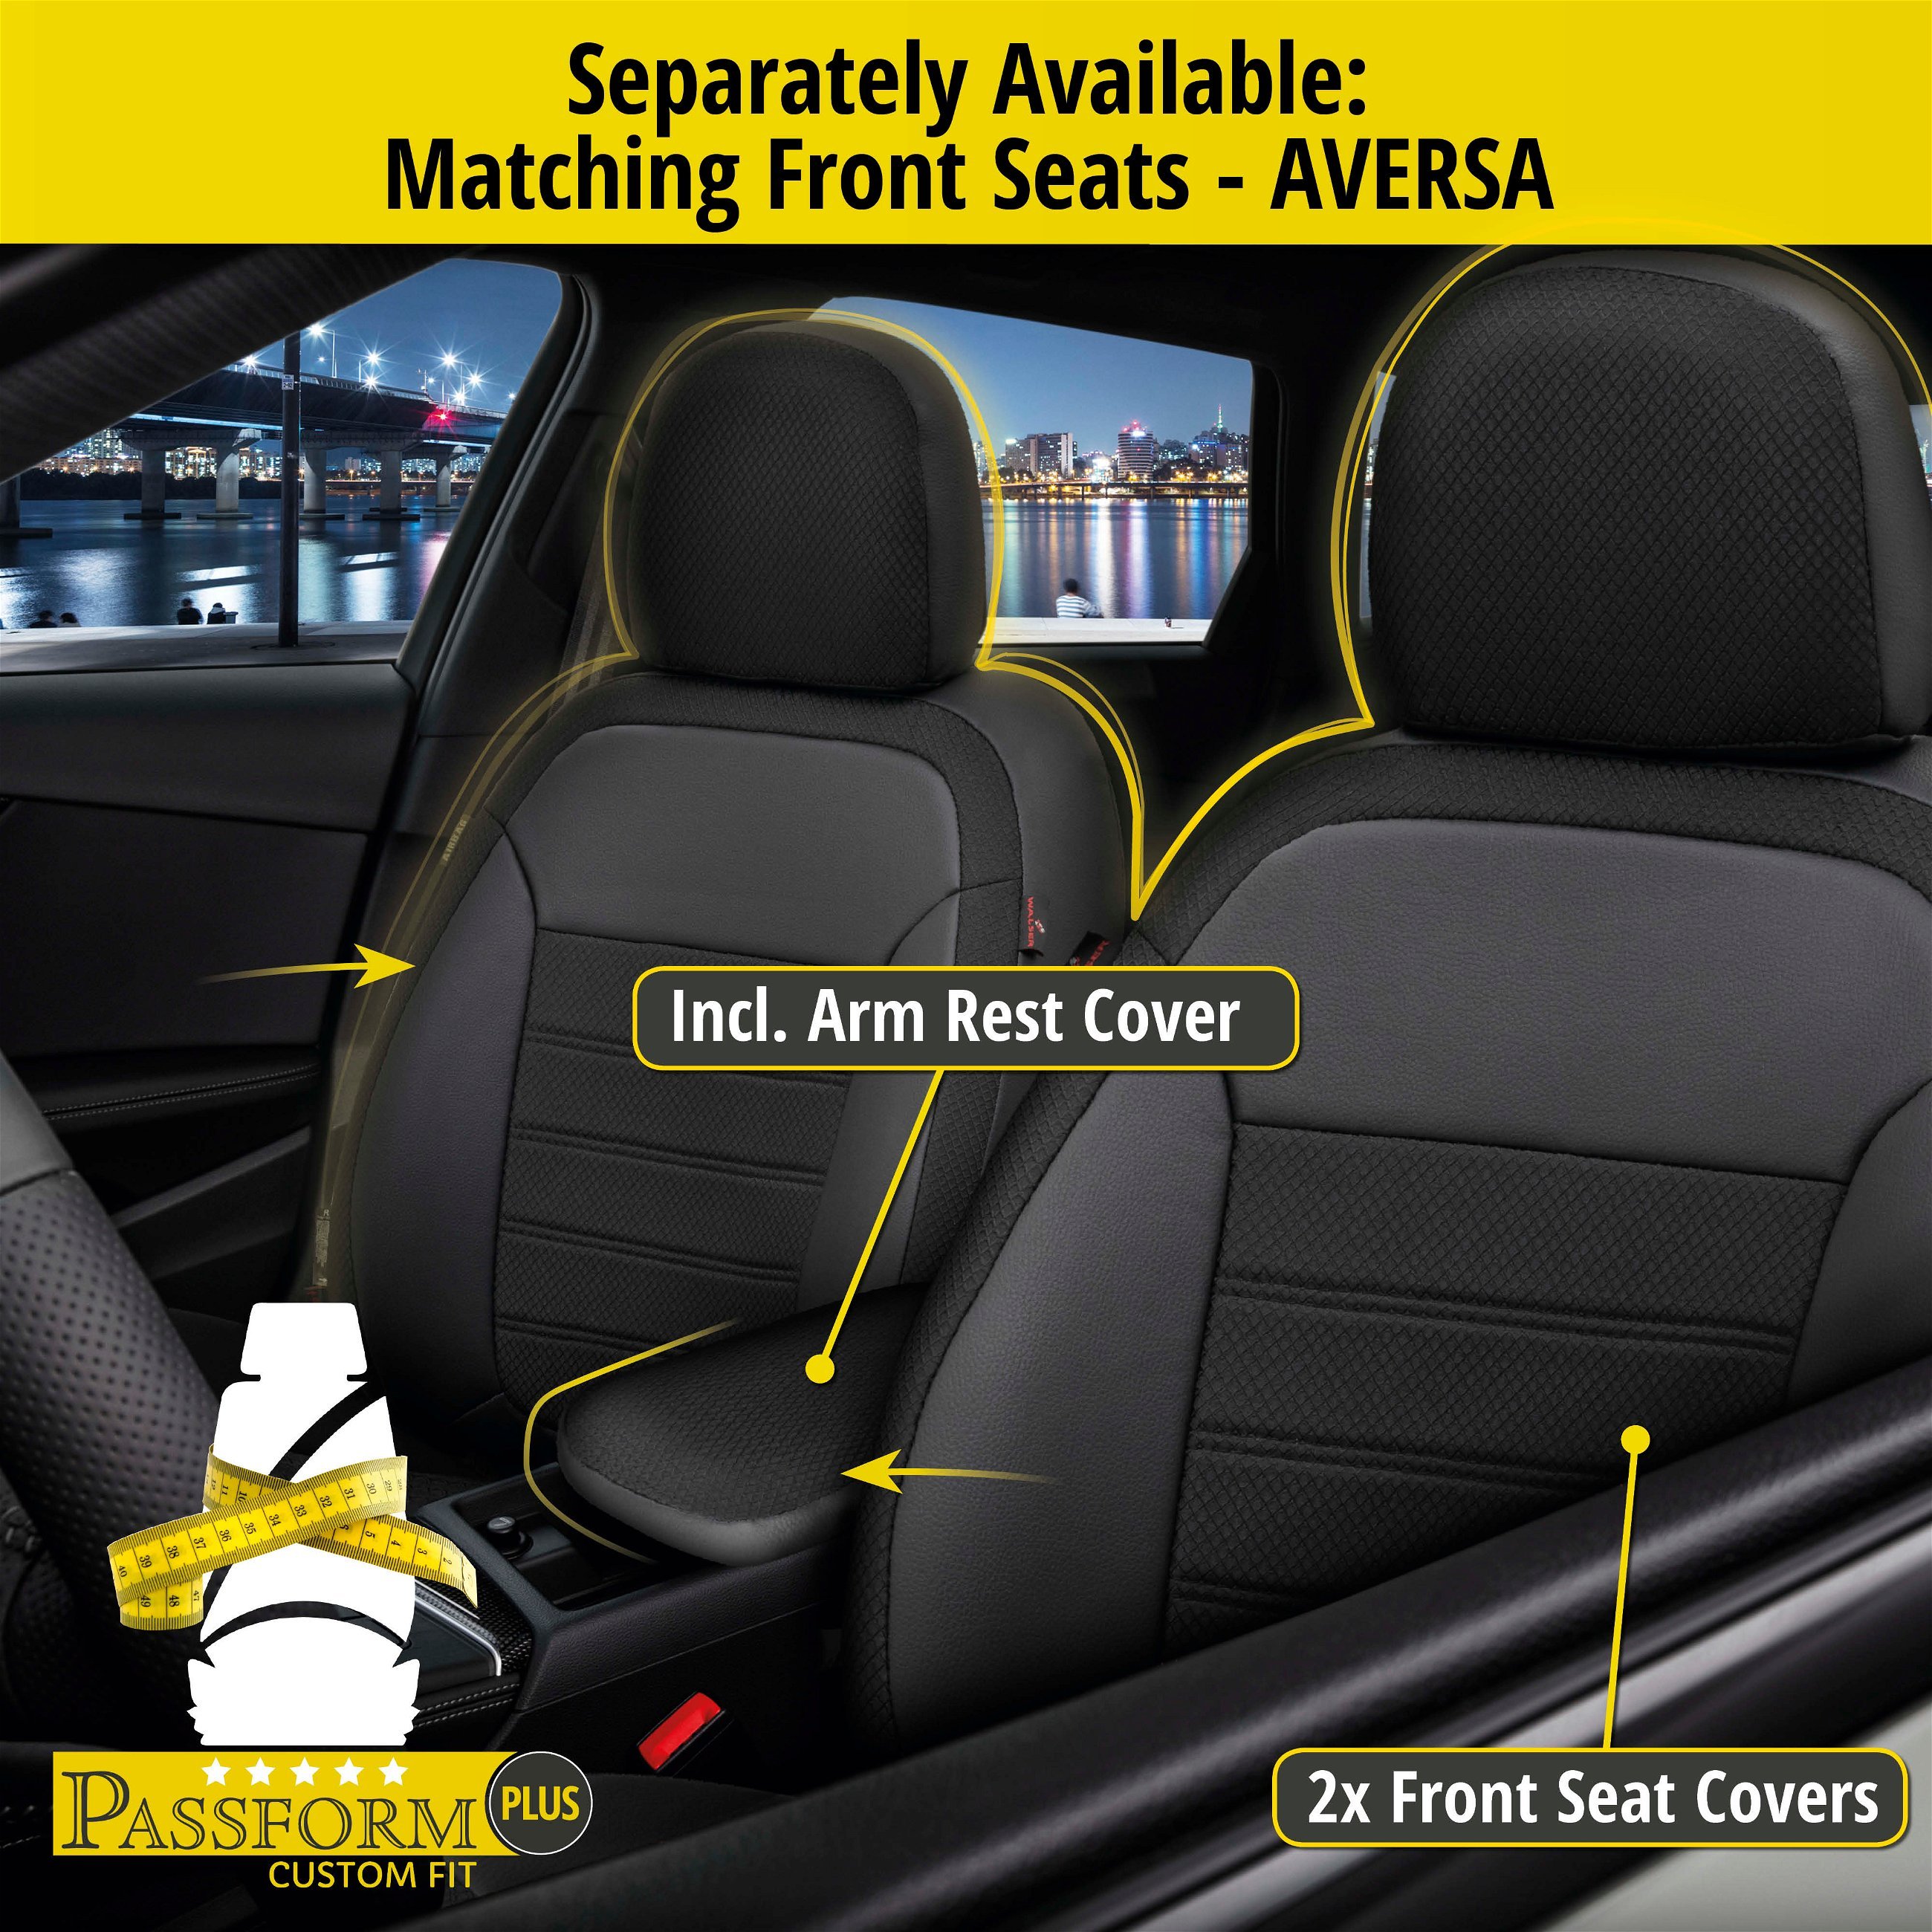 Seat Cover Aversa for Audi A4 Avant (8W5, 8WD, B9) 08/2015-Today, 1 rear seat cover for sport seats